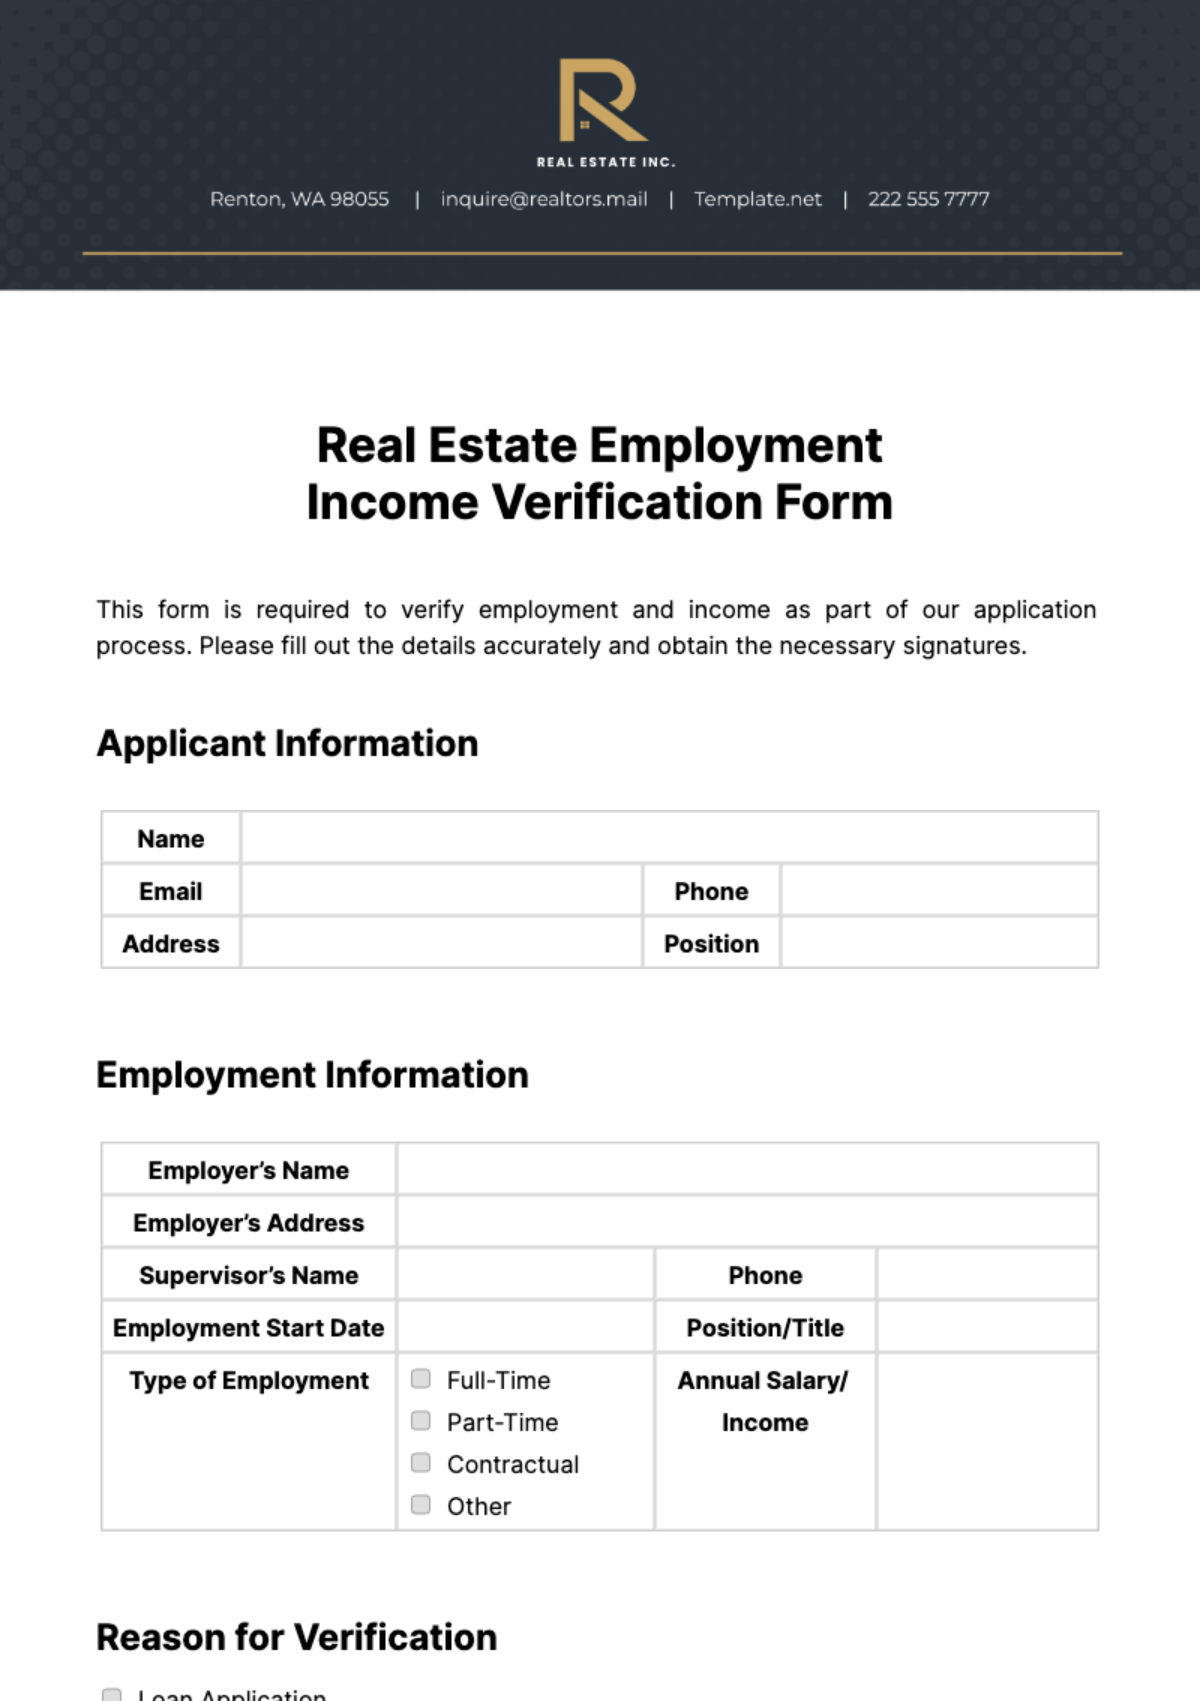 Real Estate Employment Income Verification Form Template